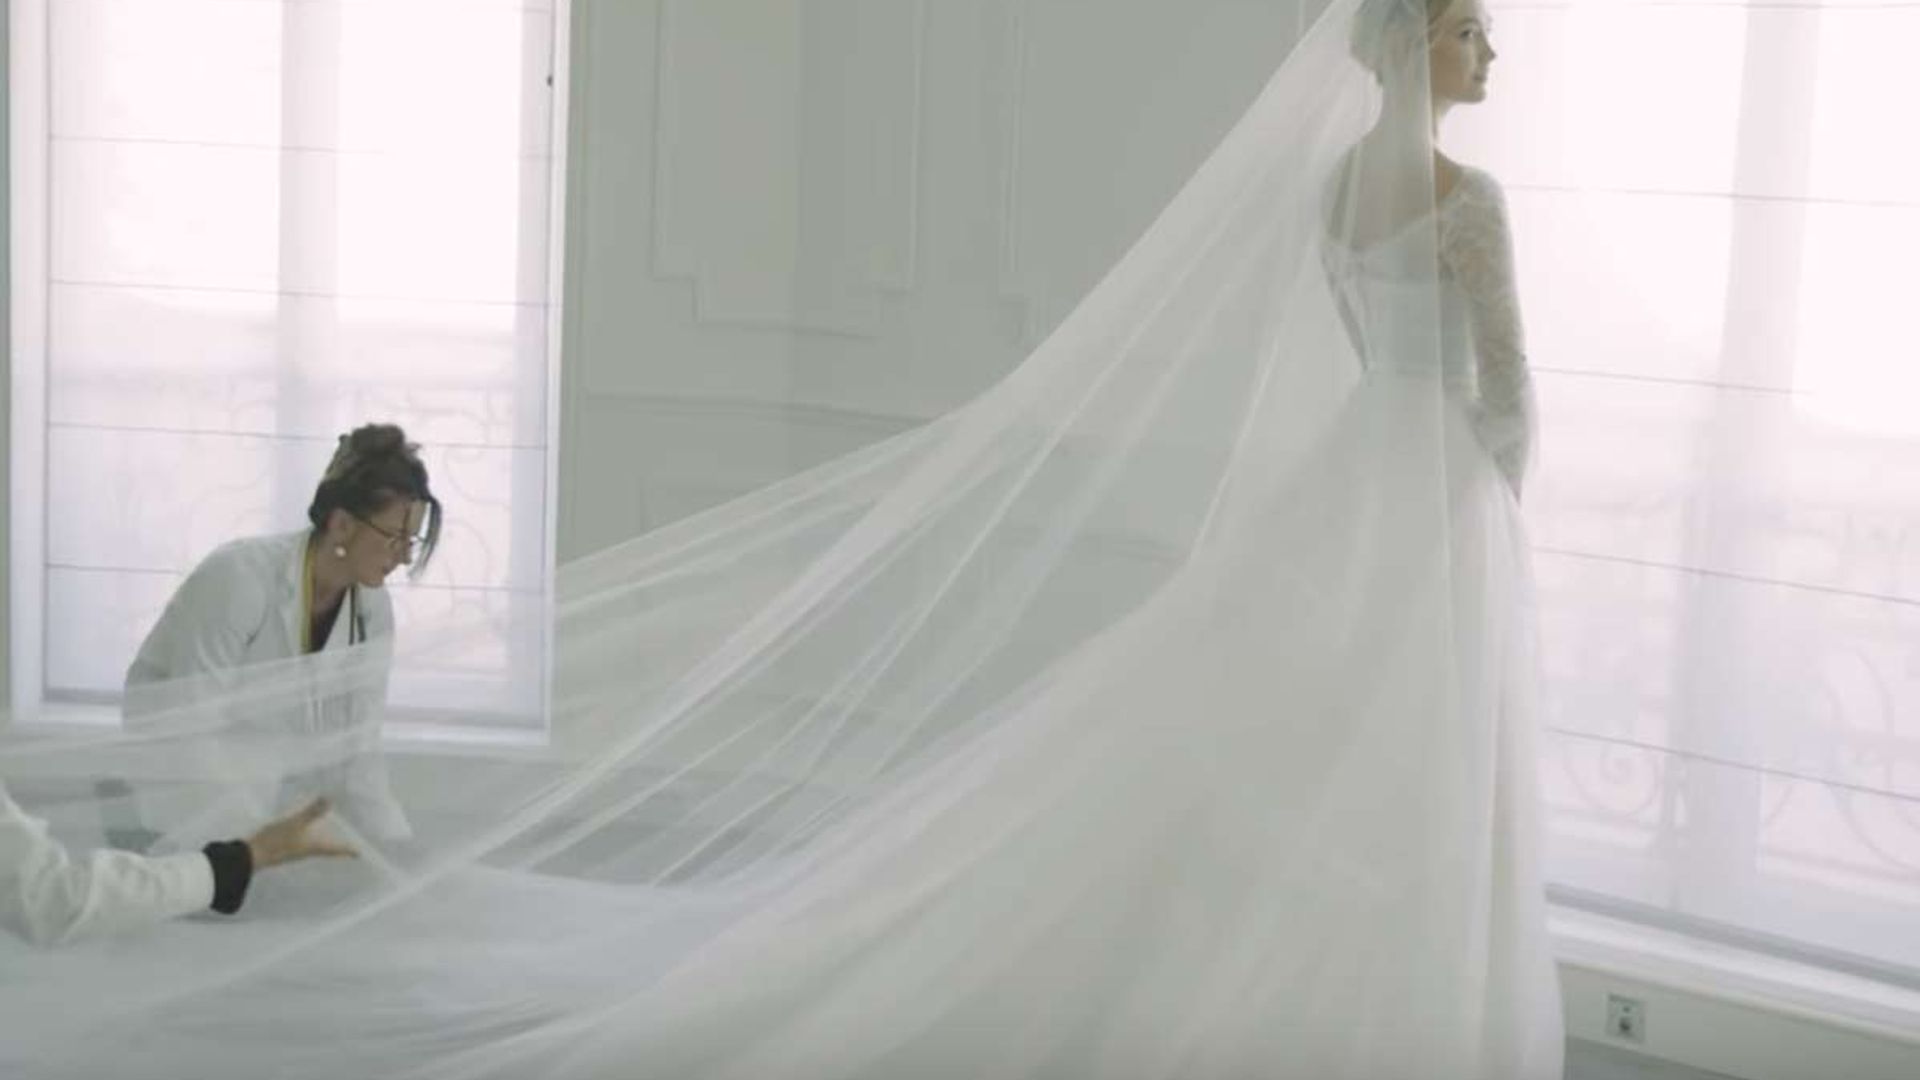 Karlie Kloss shares behind-the-scenes look at her Dior wedding dress fittings